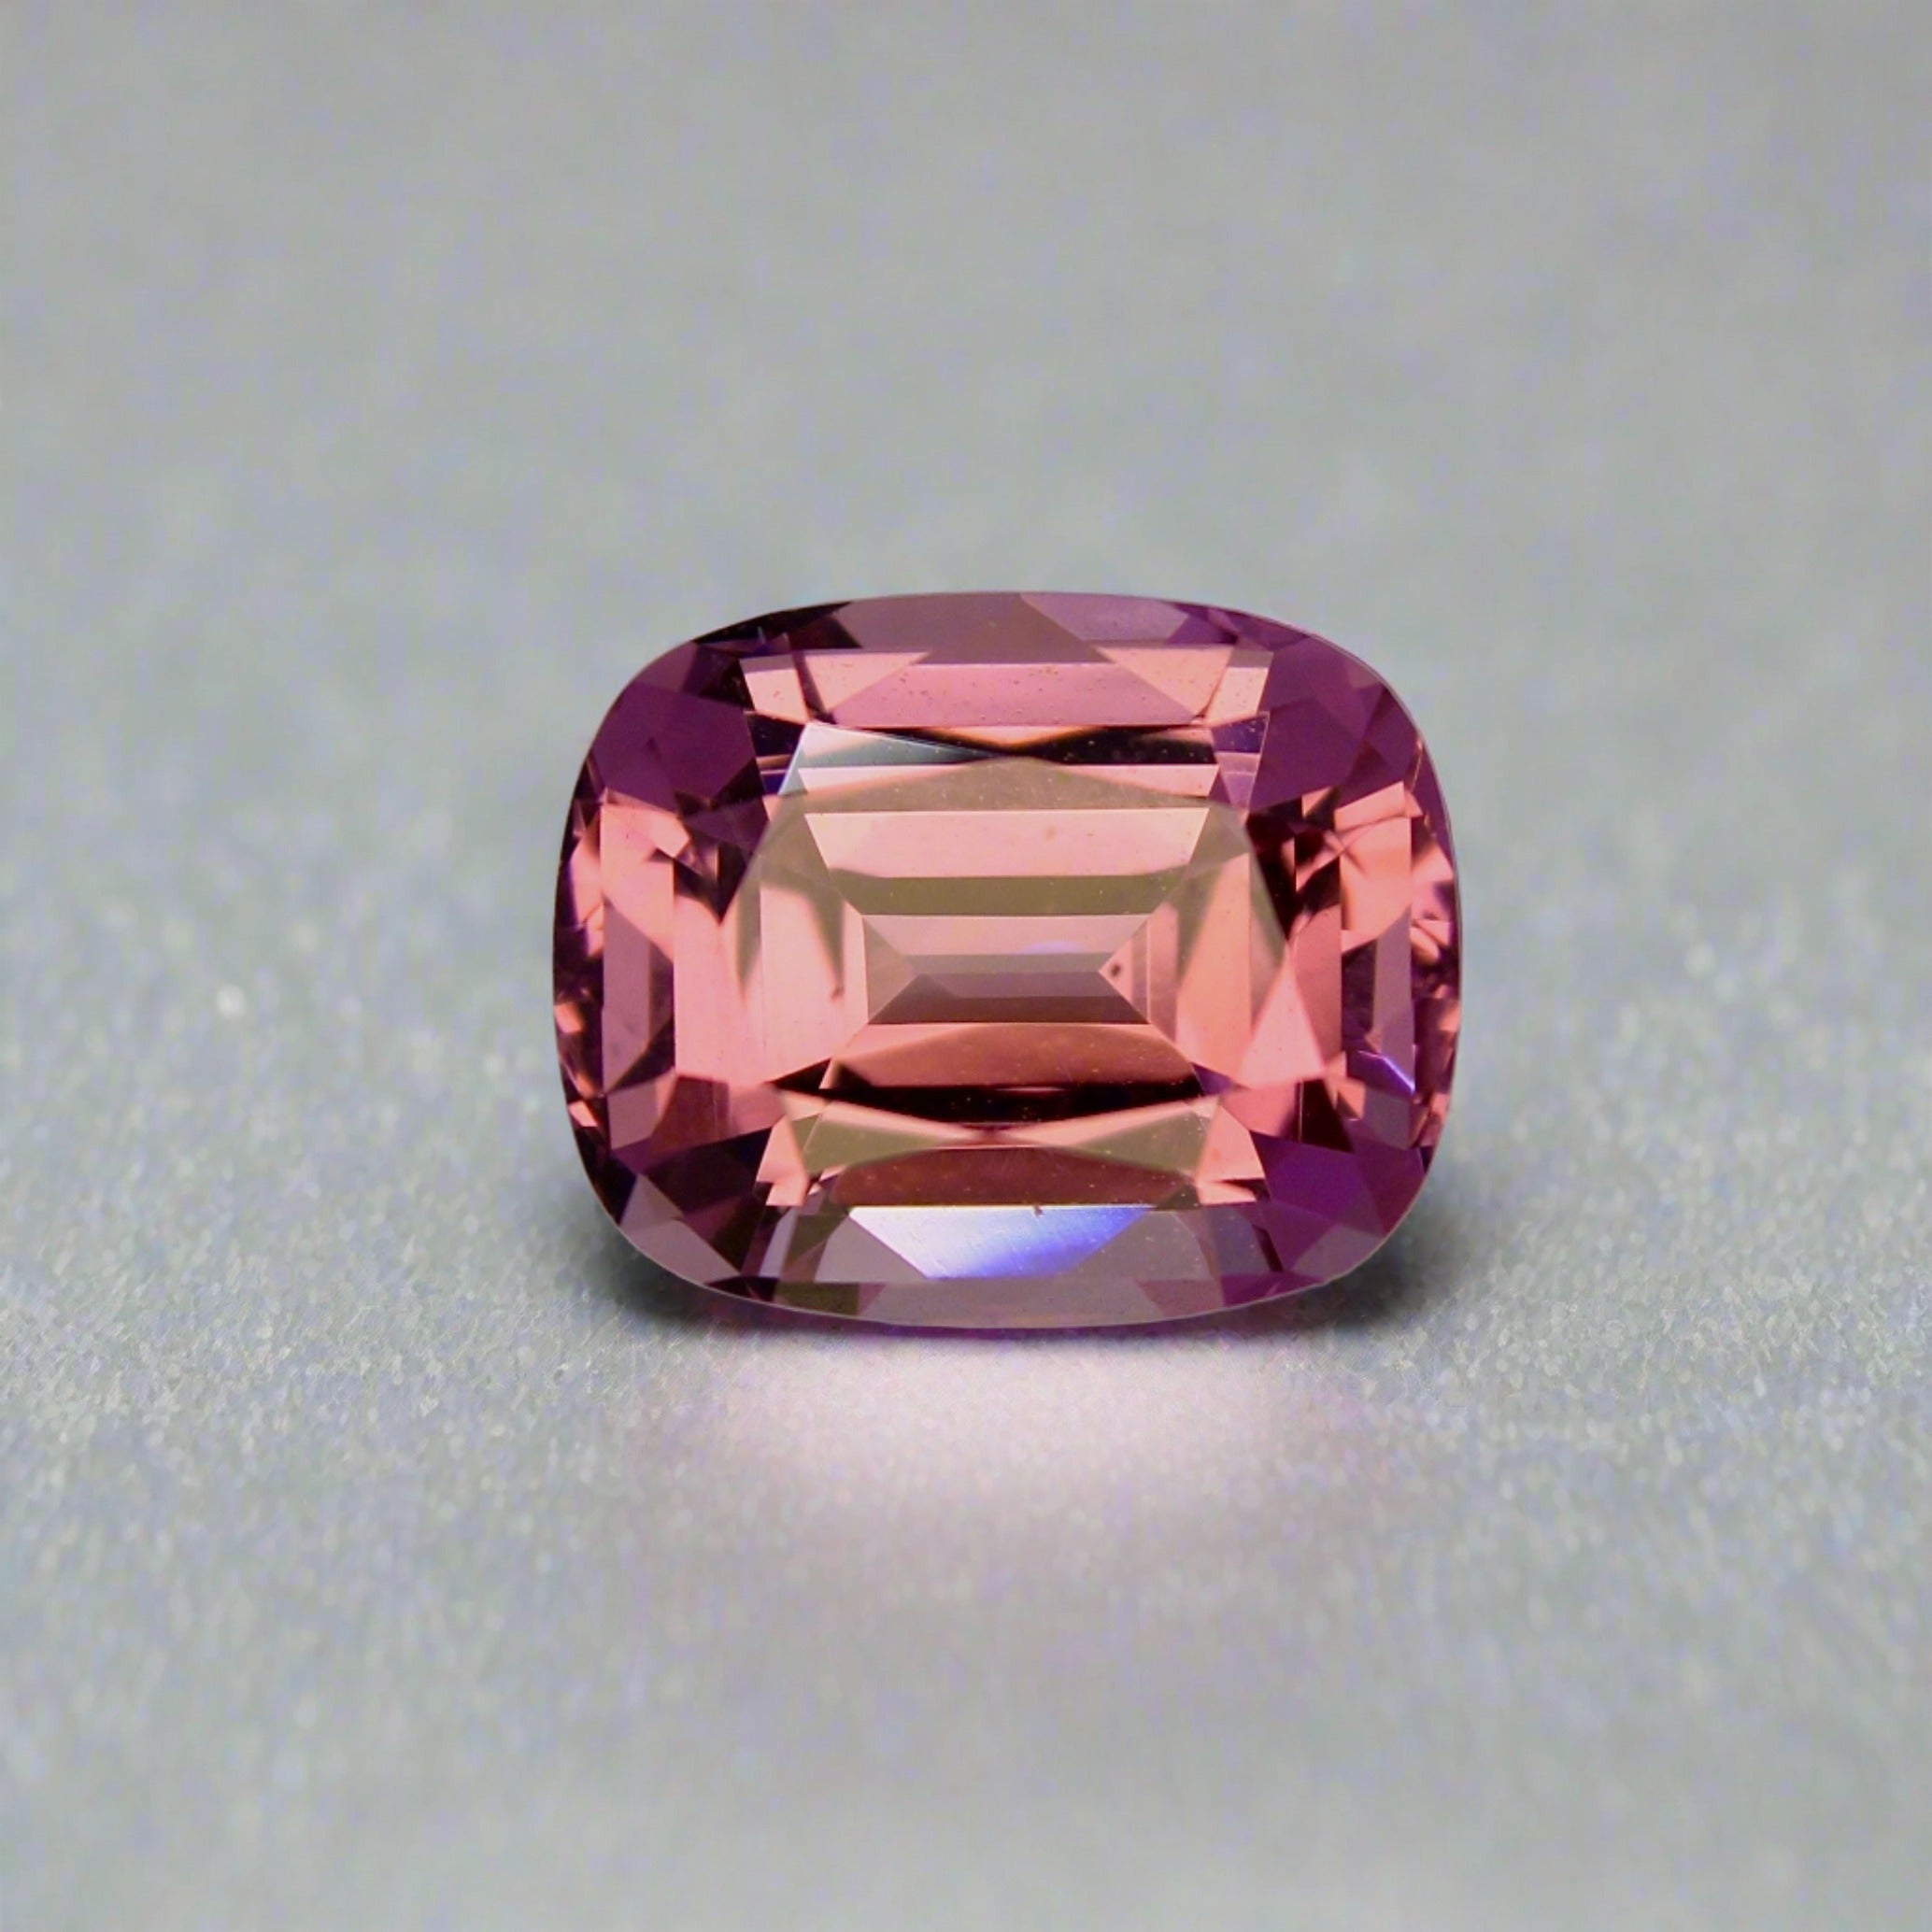 Pink Malaya Garnet Cushion in an exceptional vivid pink color